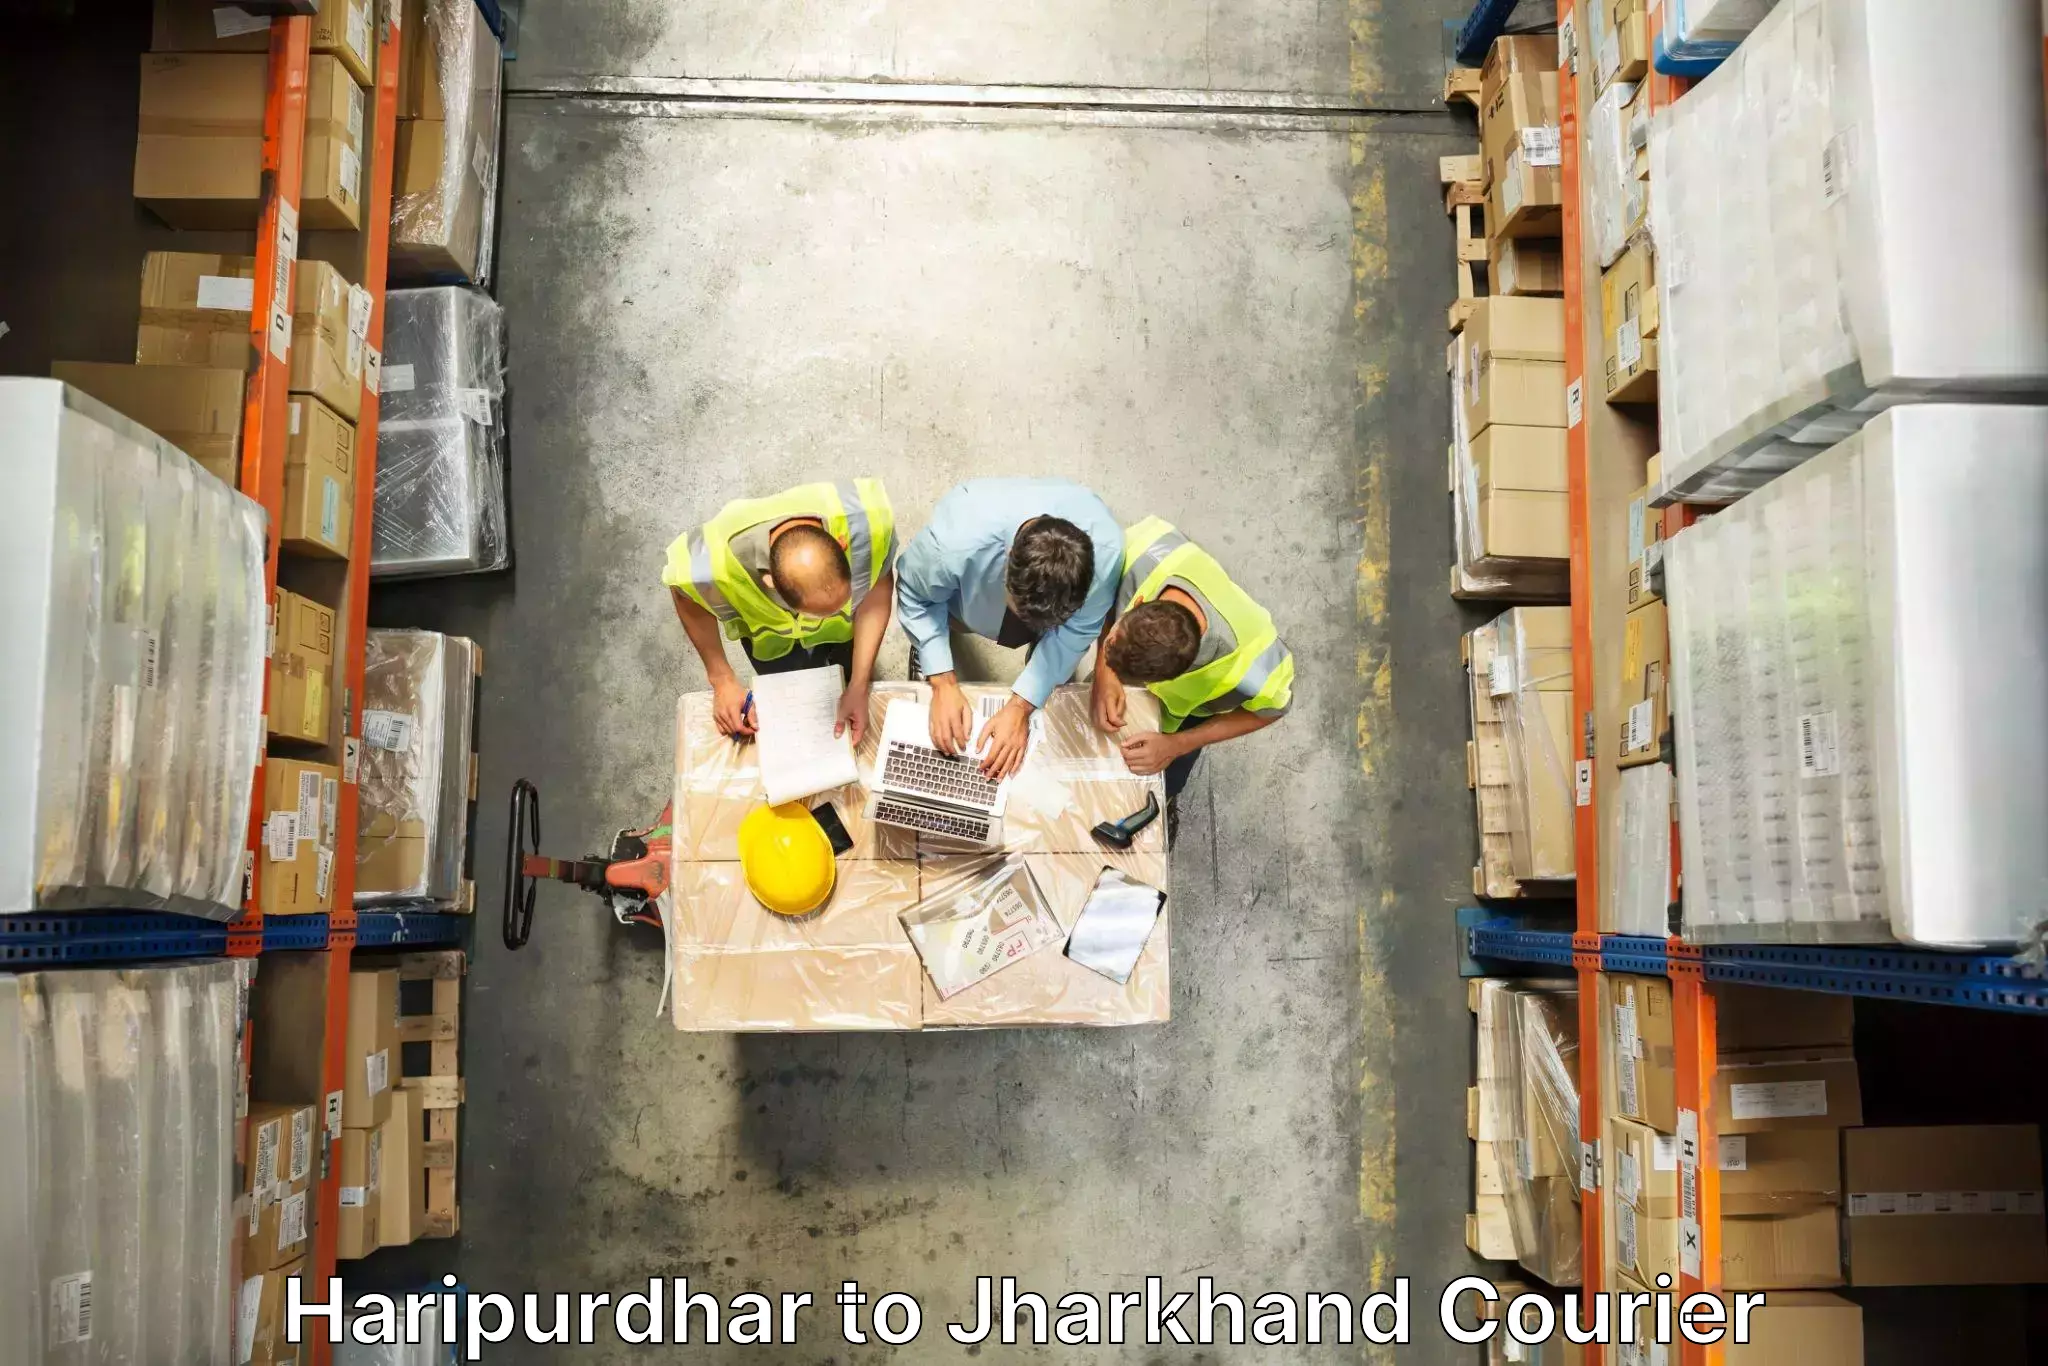 Furniture moving specialists Haripurdhar to Poreyahat